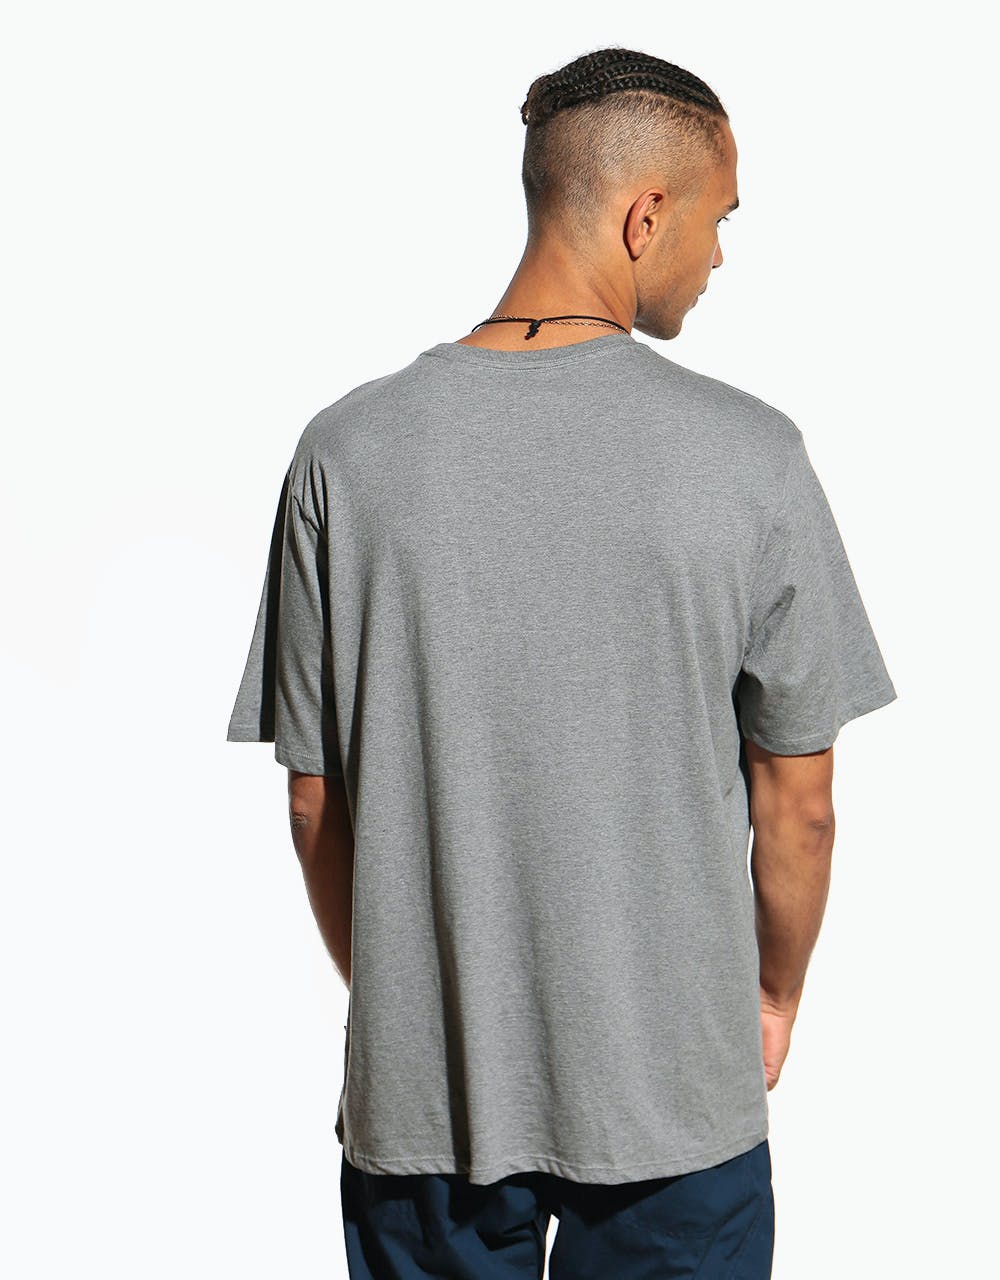 Patagonia Road to Regenerative T-Shirt - Feather Grey